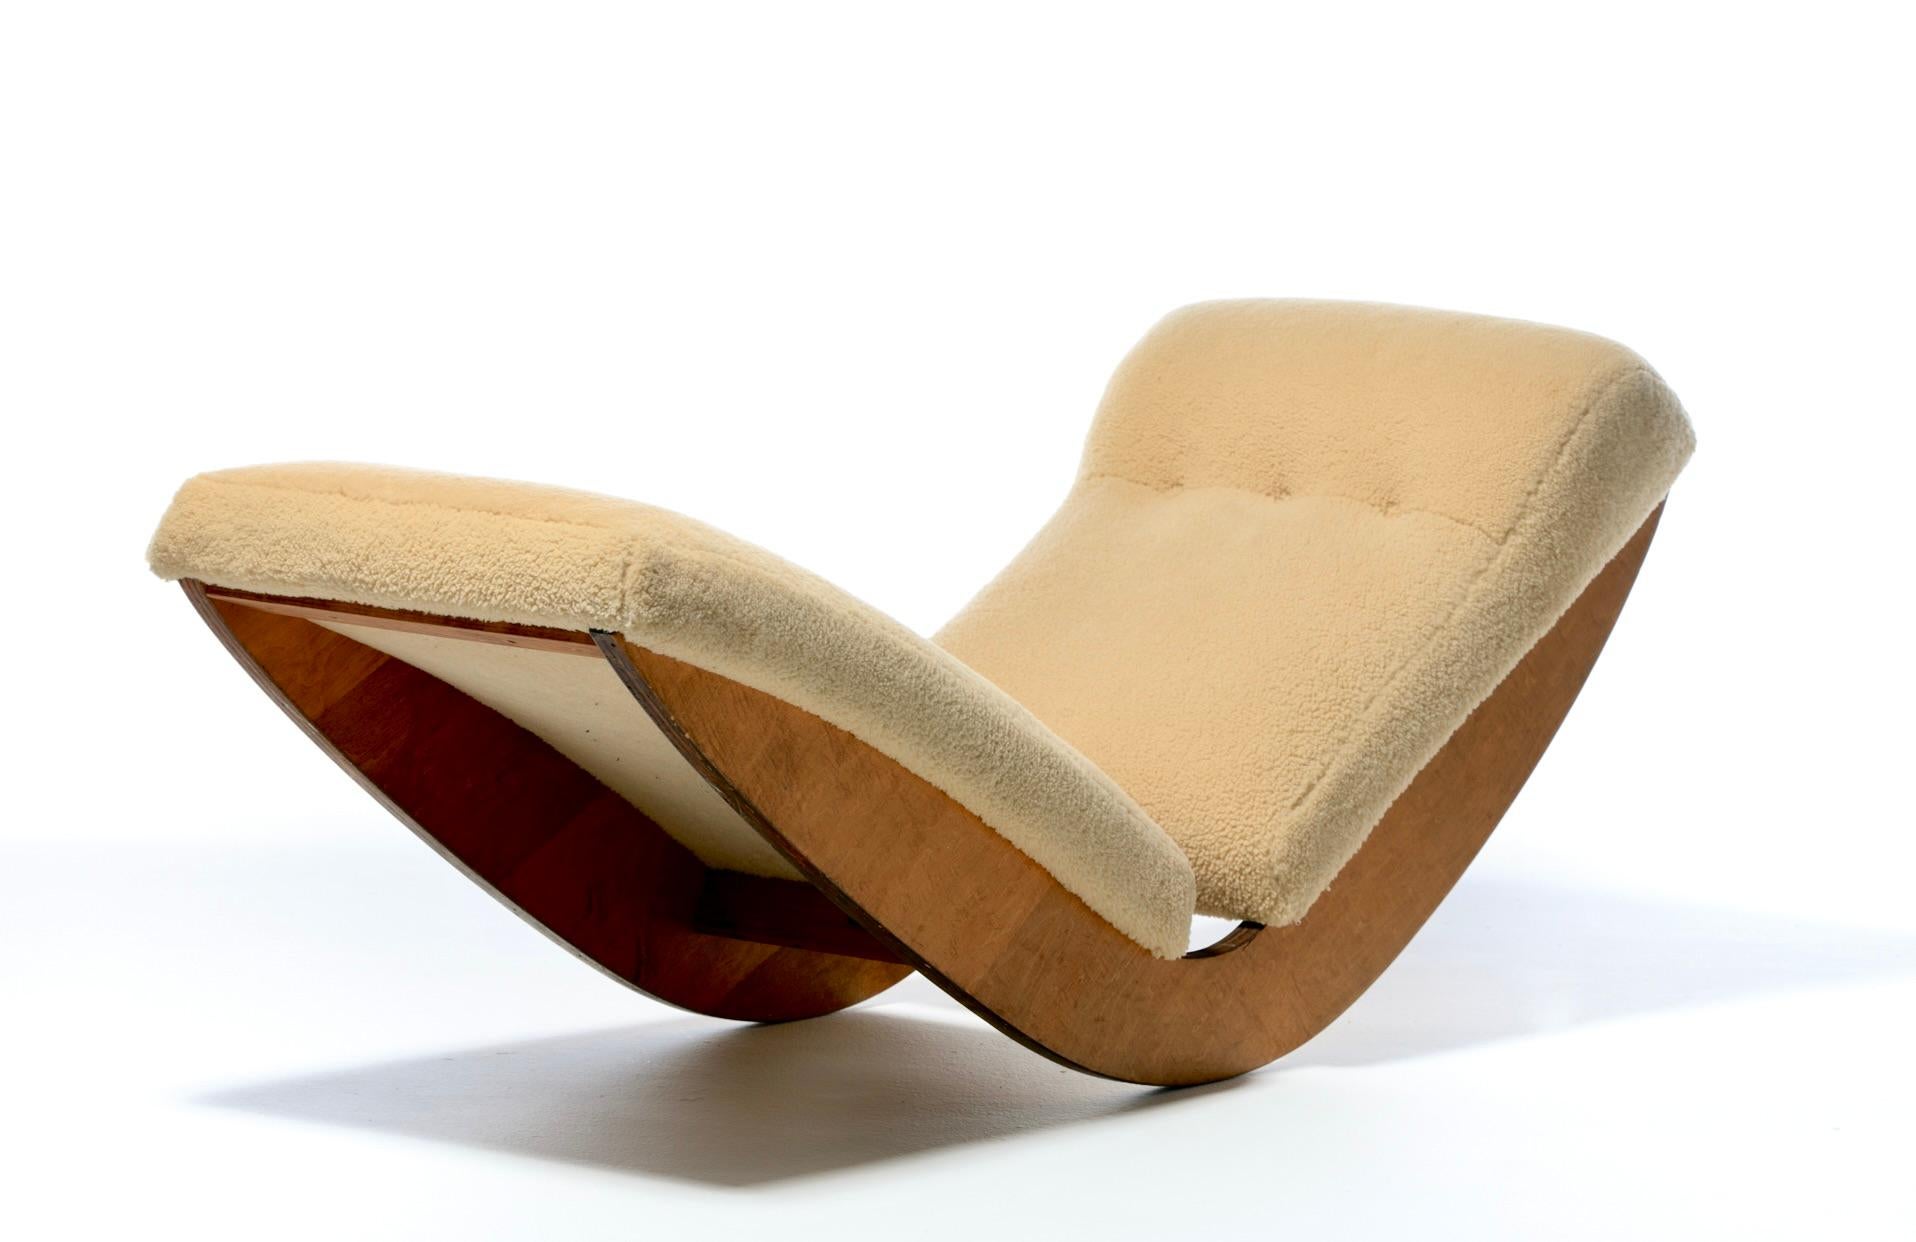 20th Century Sculptural Walnut Rocking Chaise Lounge in Soft Butterscotch Shearling c. 1980 For Sale